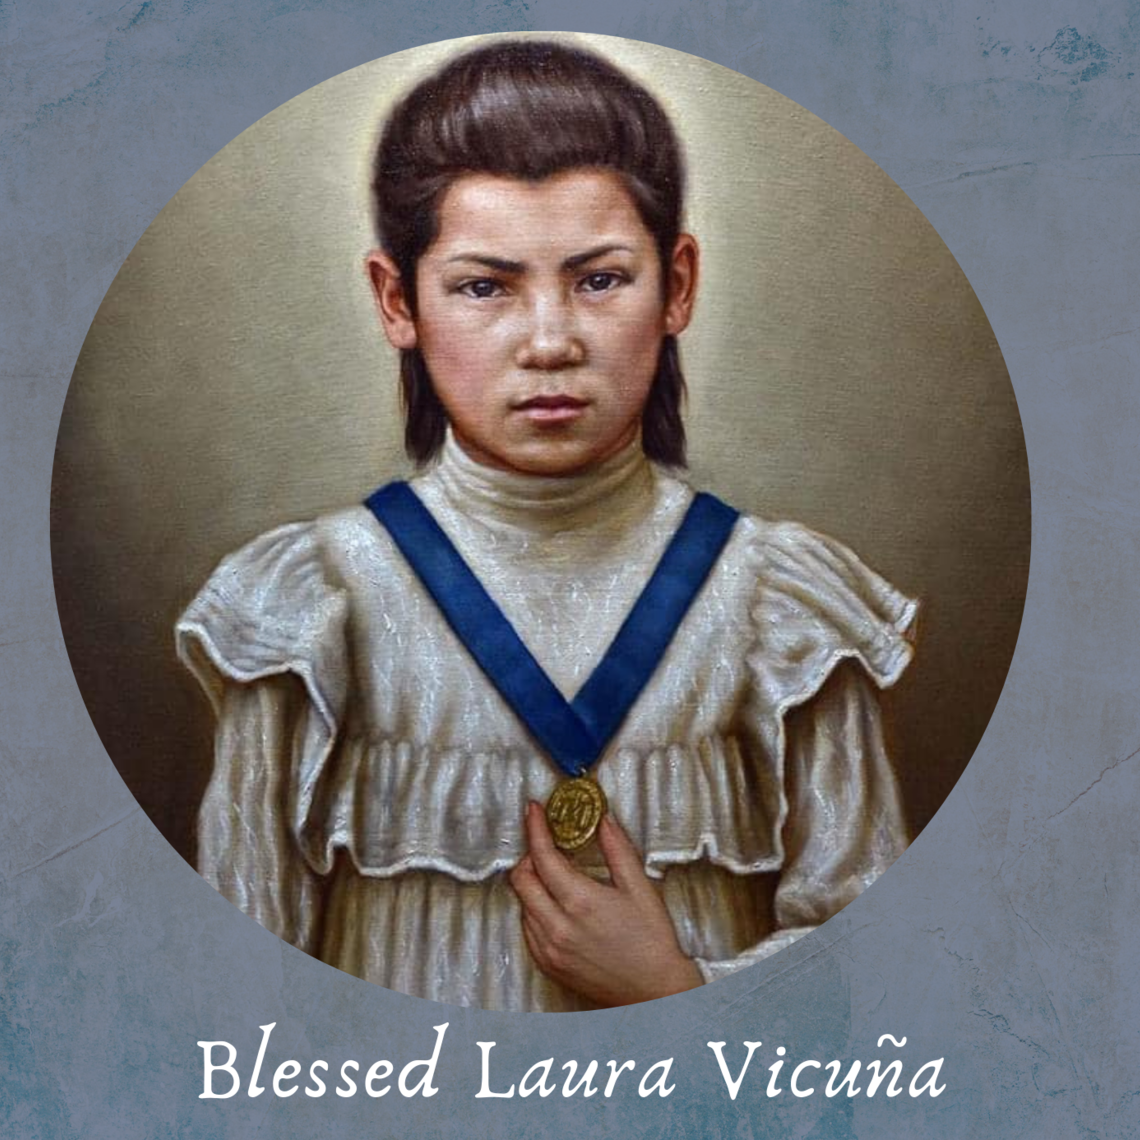 Copy Of Blessed Laura Vicuna 1